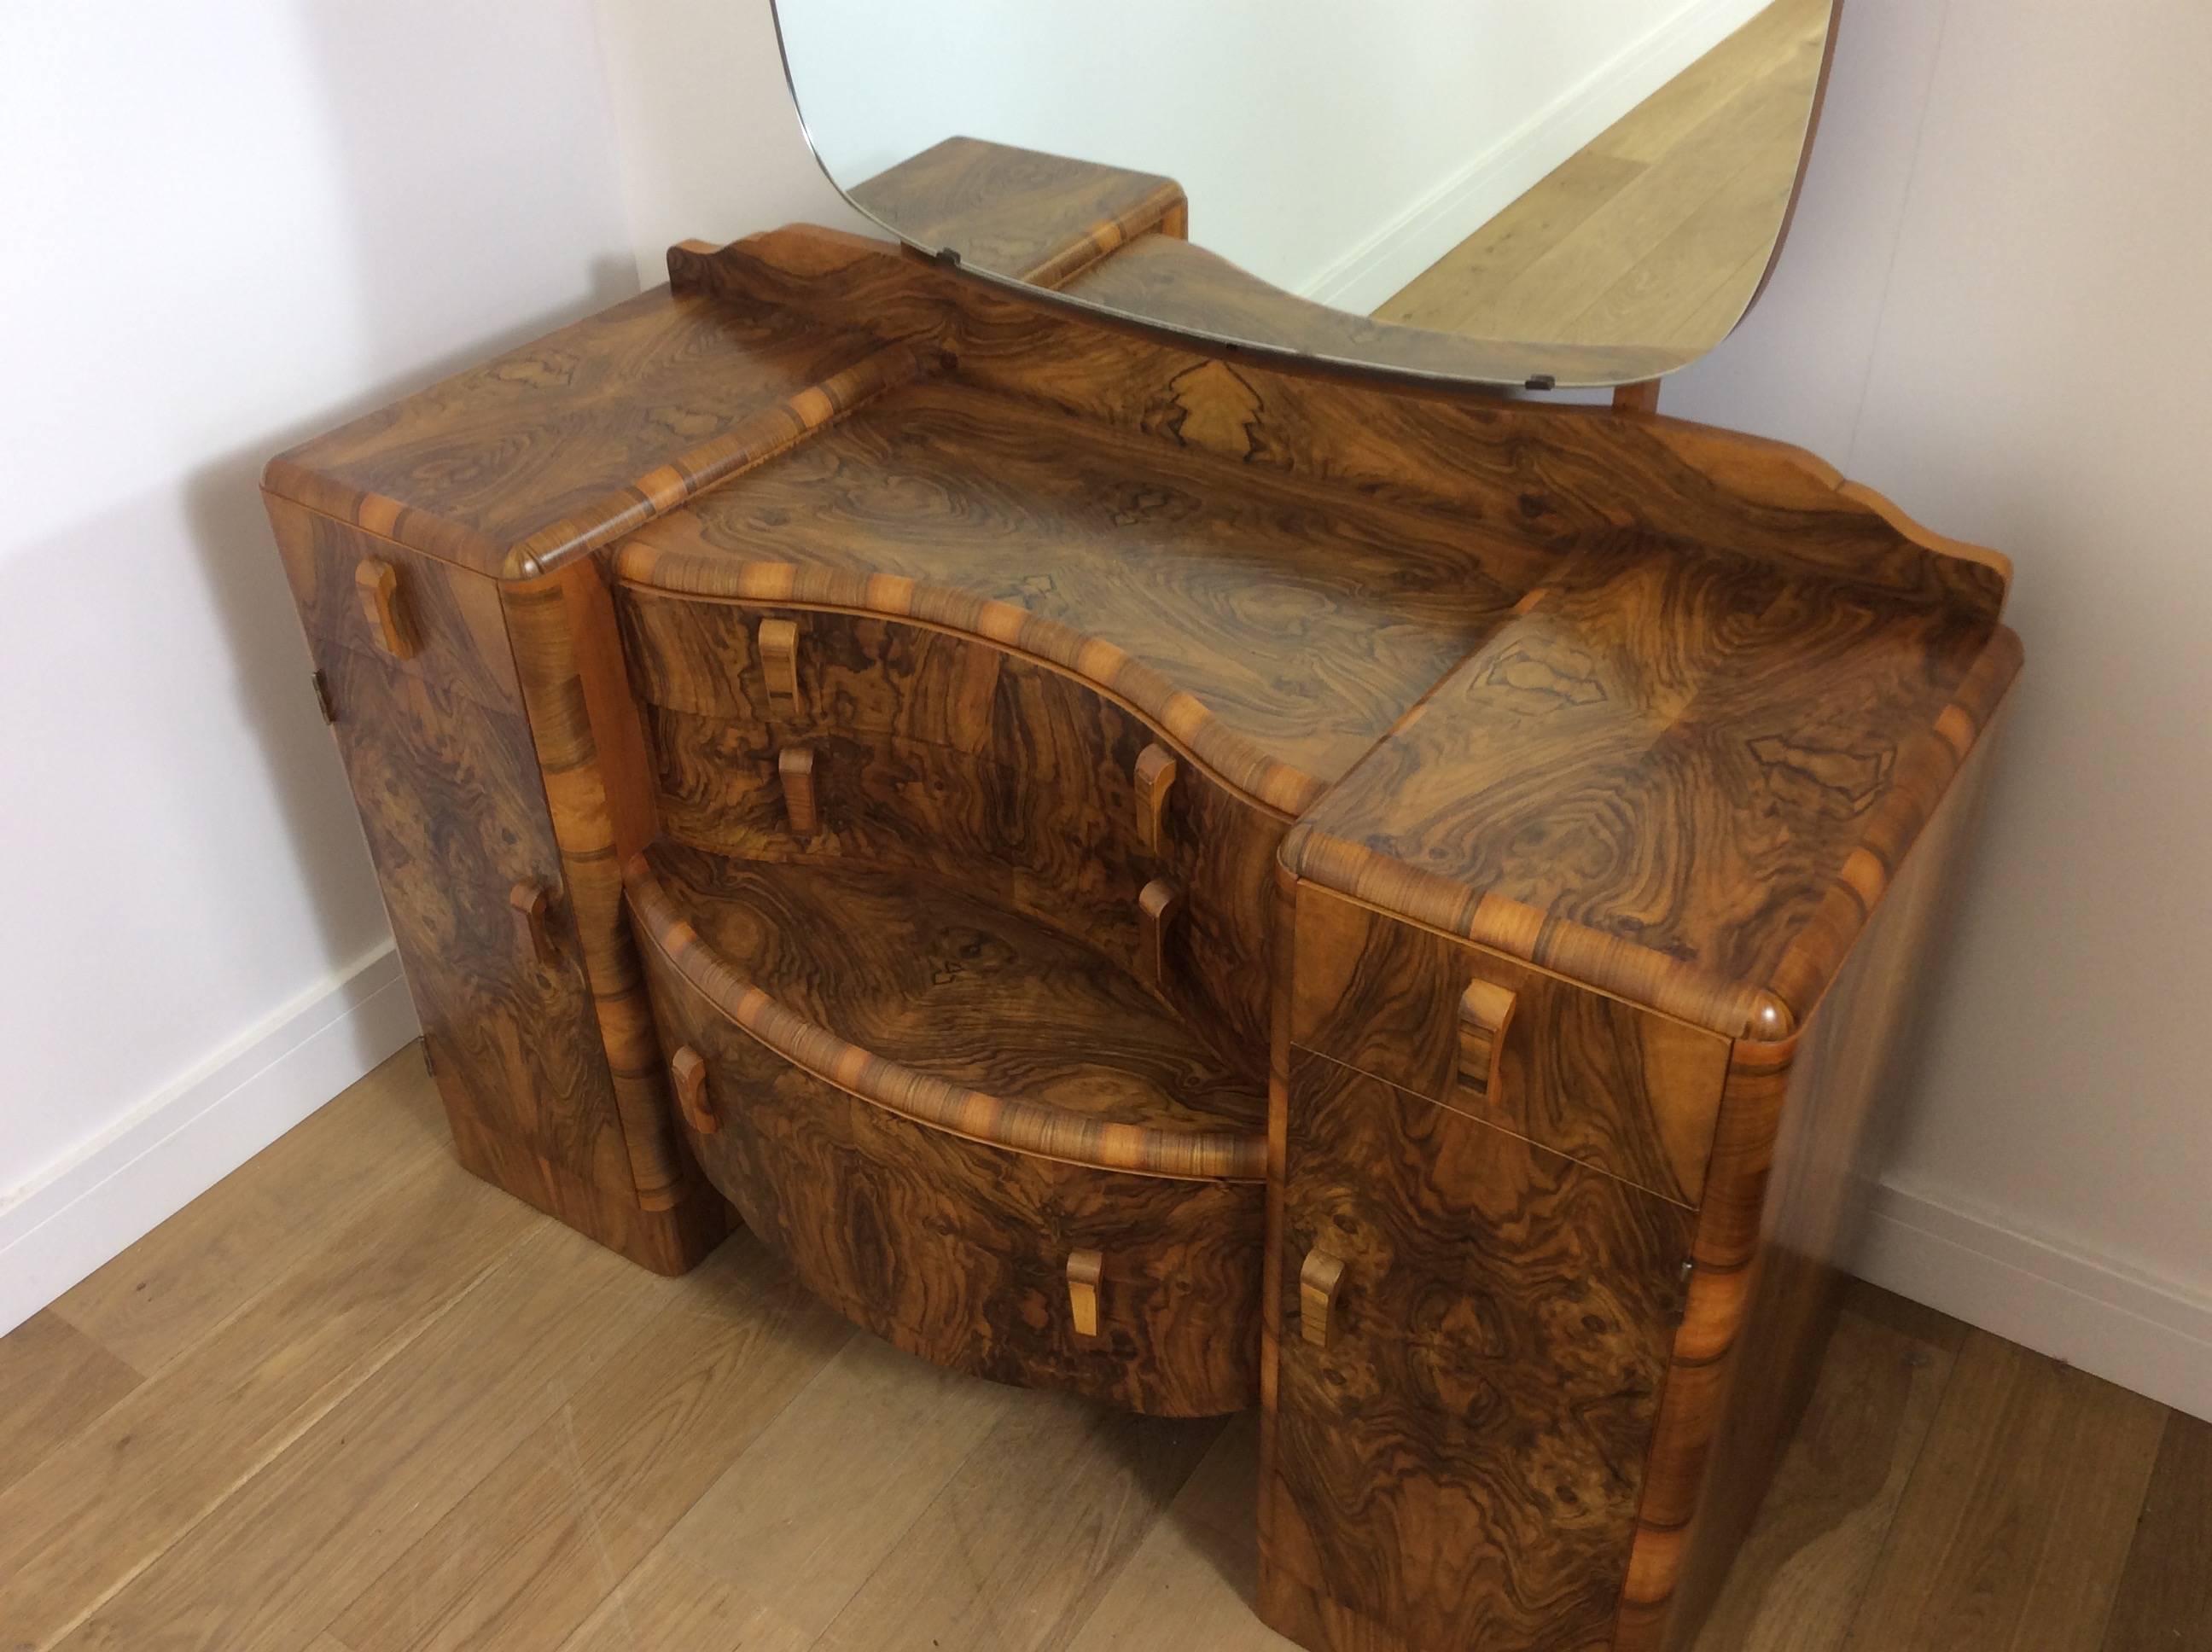 British Art Deco Dressing Table in a Stunning Figured Walnut For Sale